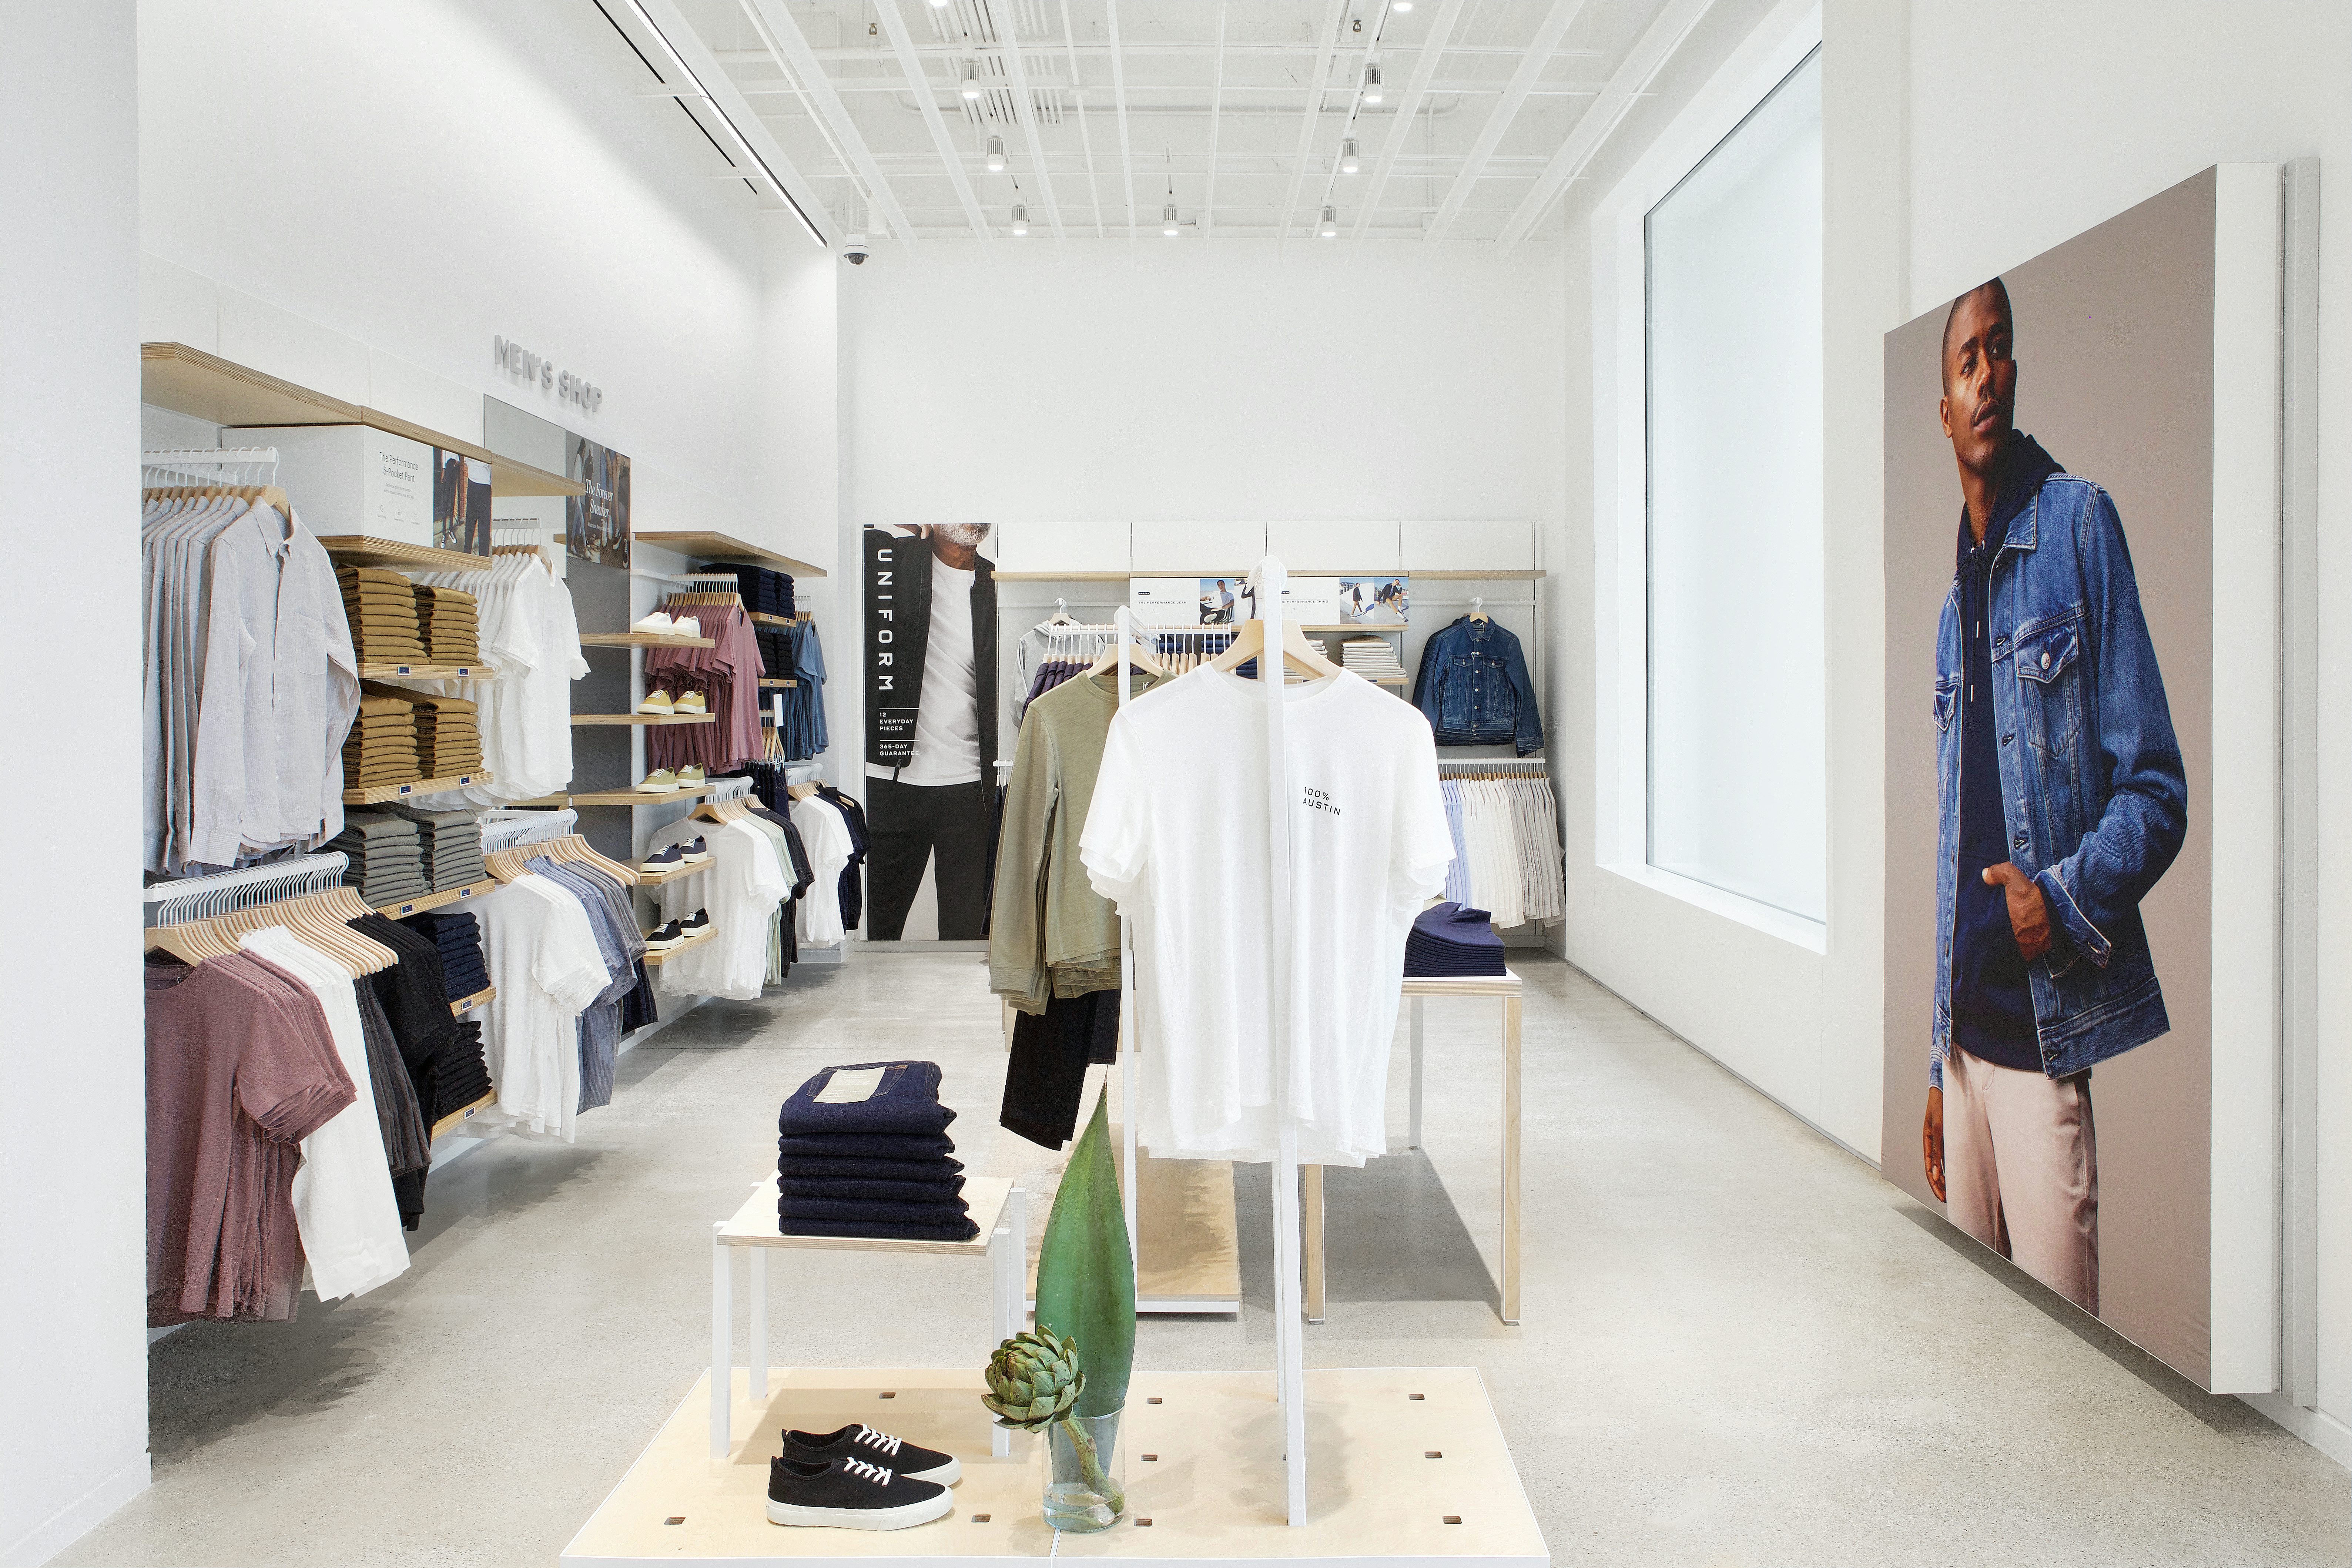 Everlane's Austin store opened in 2020. The company is planning to open 2 to 3 more stores this year. Matti Gresham for Everlane.